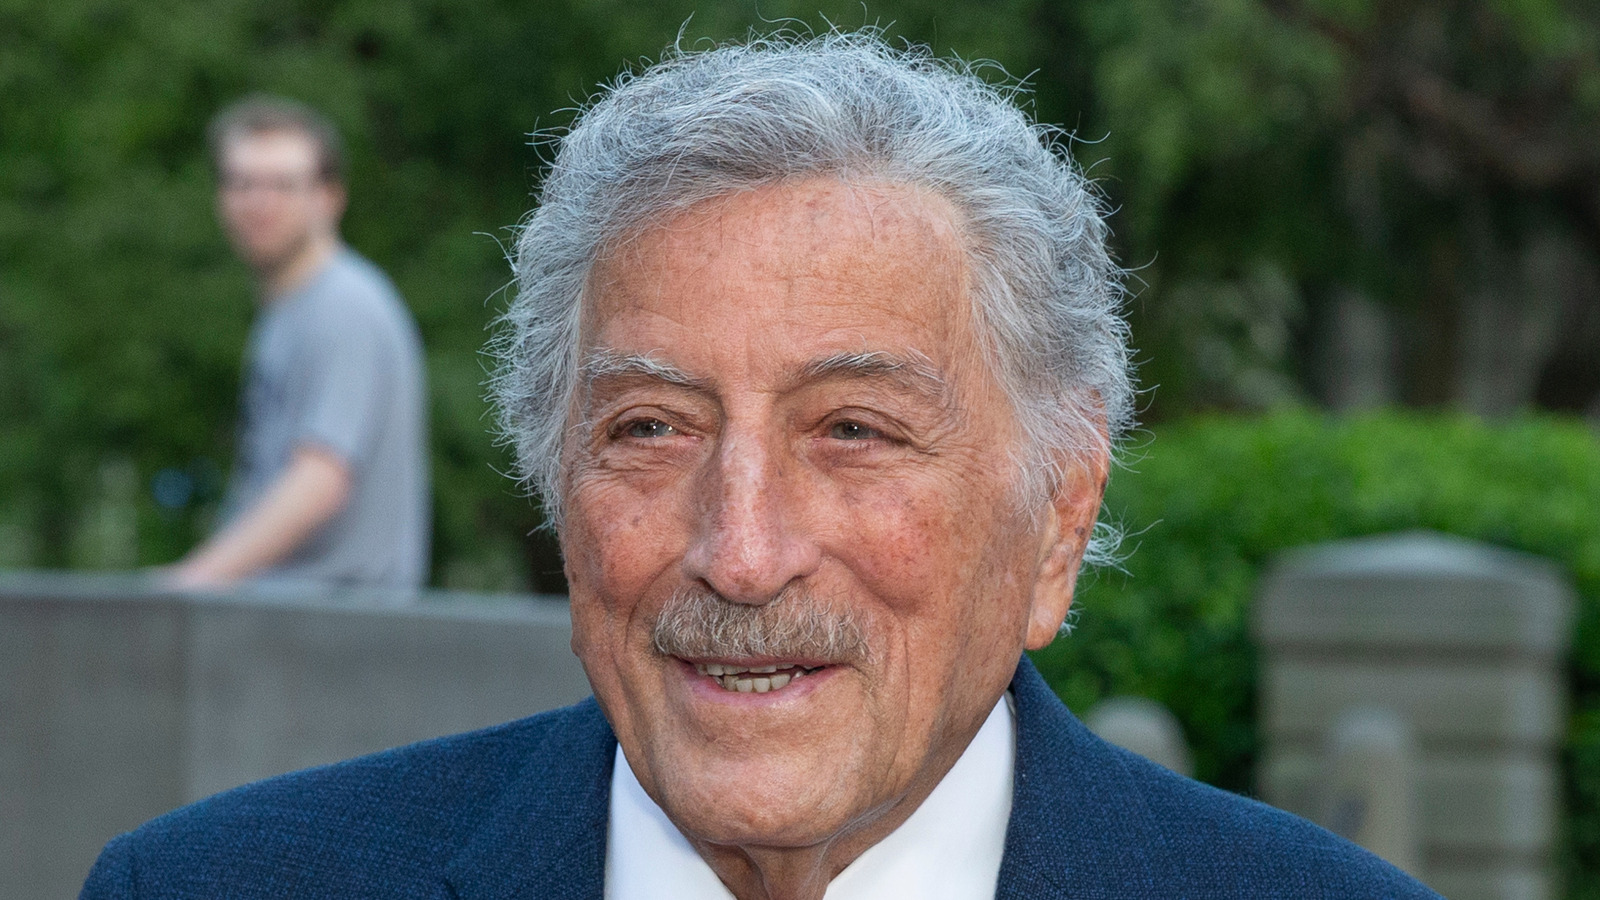 The Real Reason Tony Bennett Changed His Name